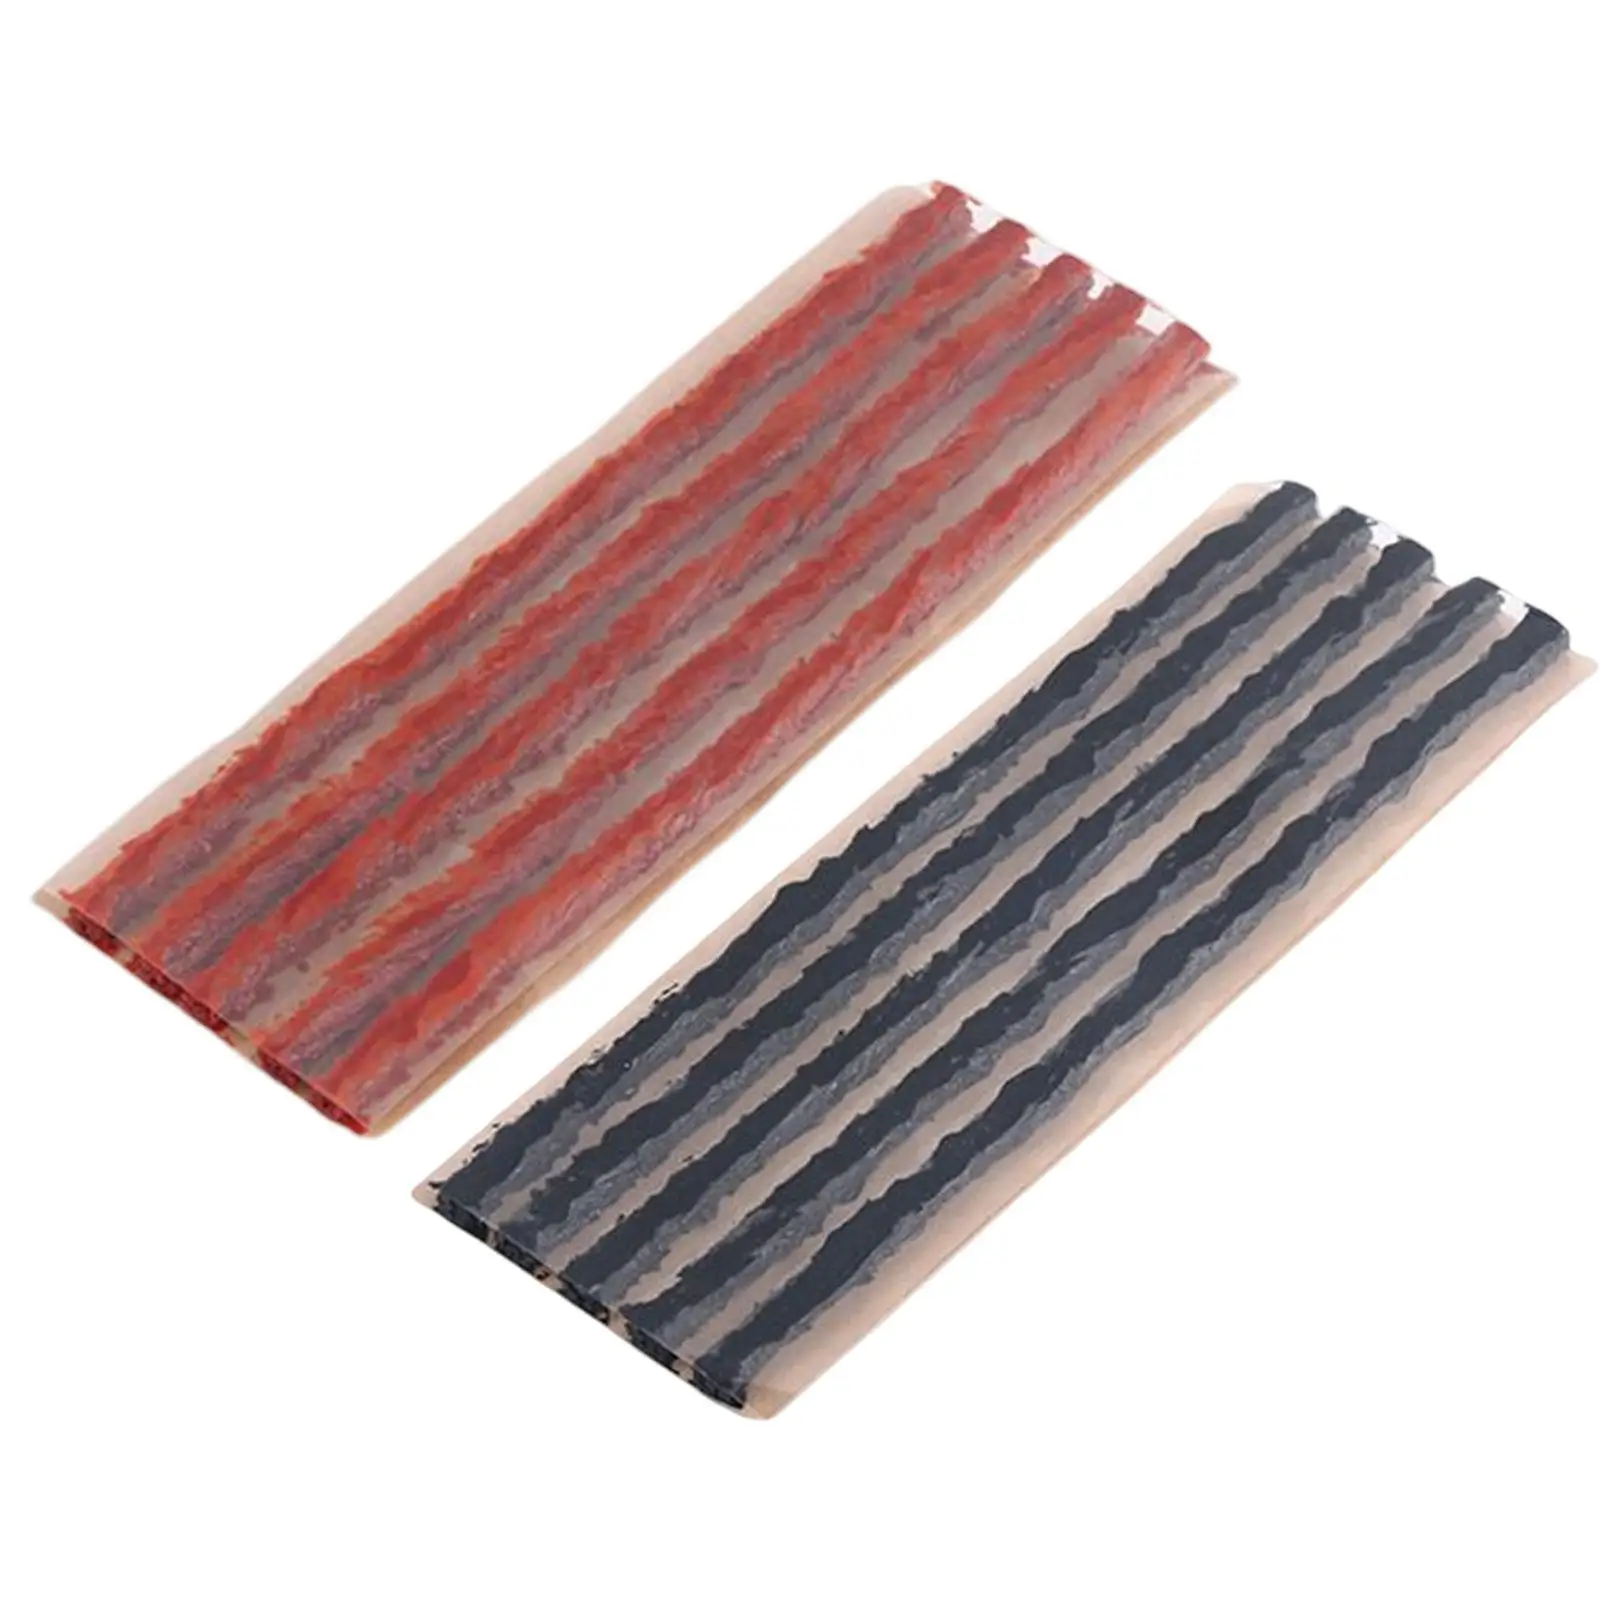 

5Pcs Tubeless Puncture Tire Repair Strings Rubber Strip 200Mmx6mm Tire Repair Plug for Motorcycle Automotive Truck SUV RV